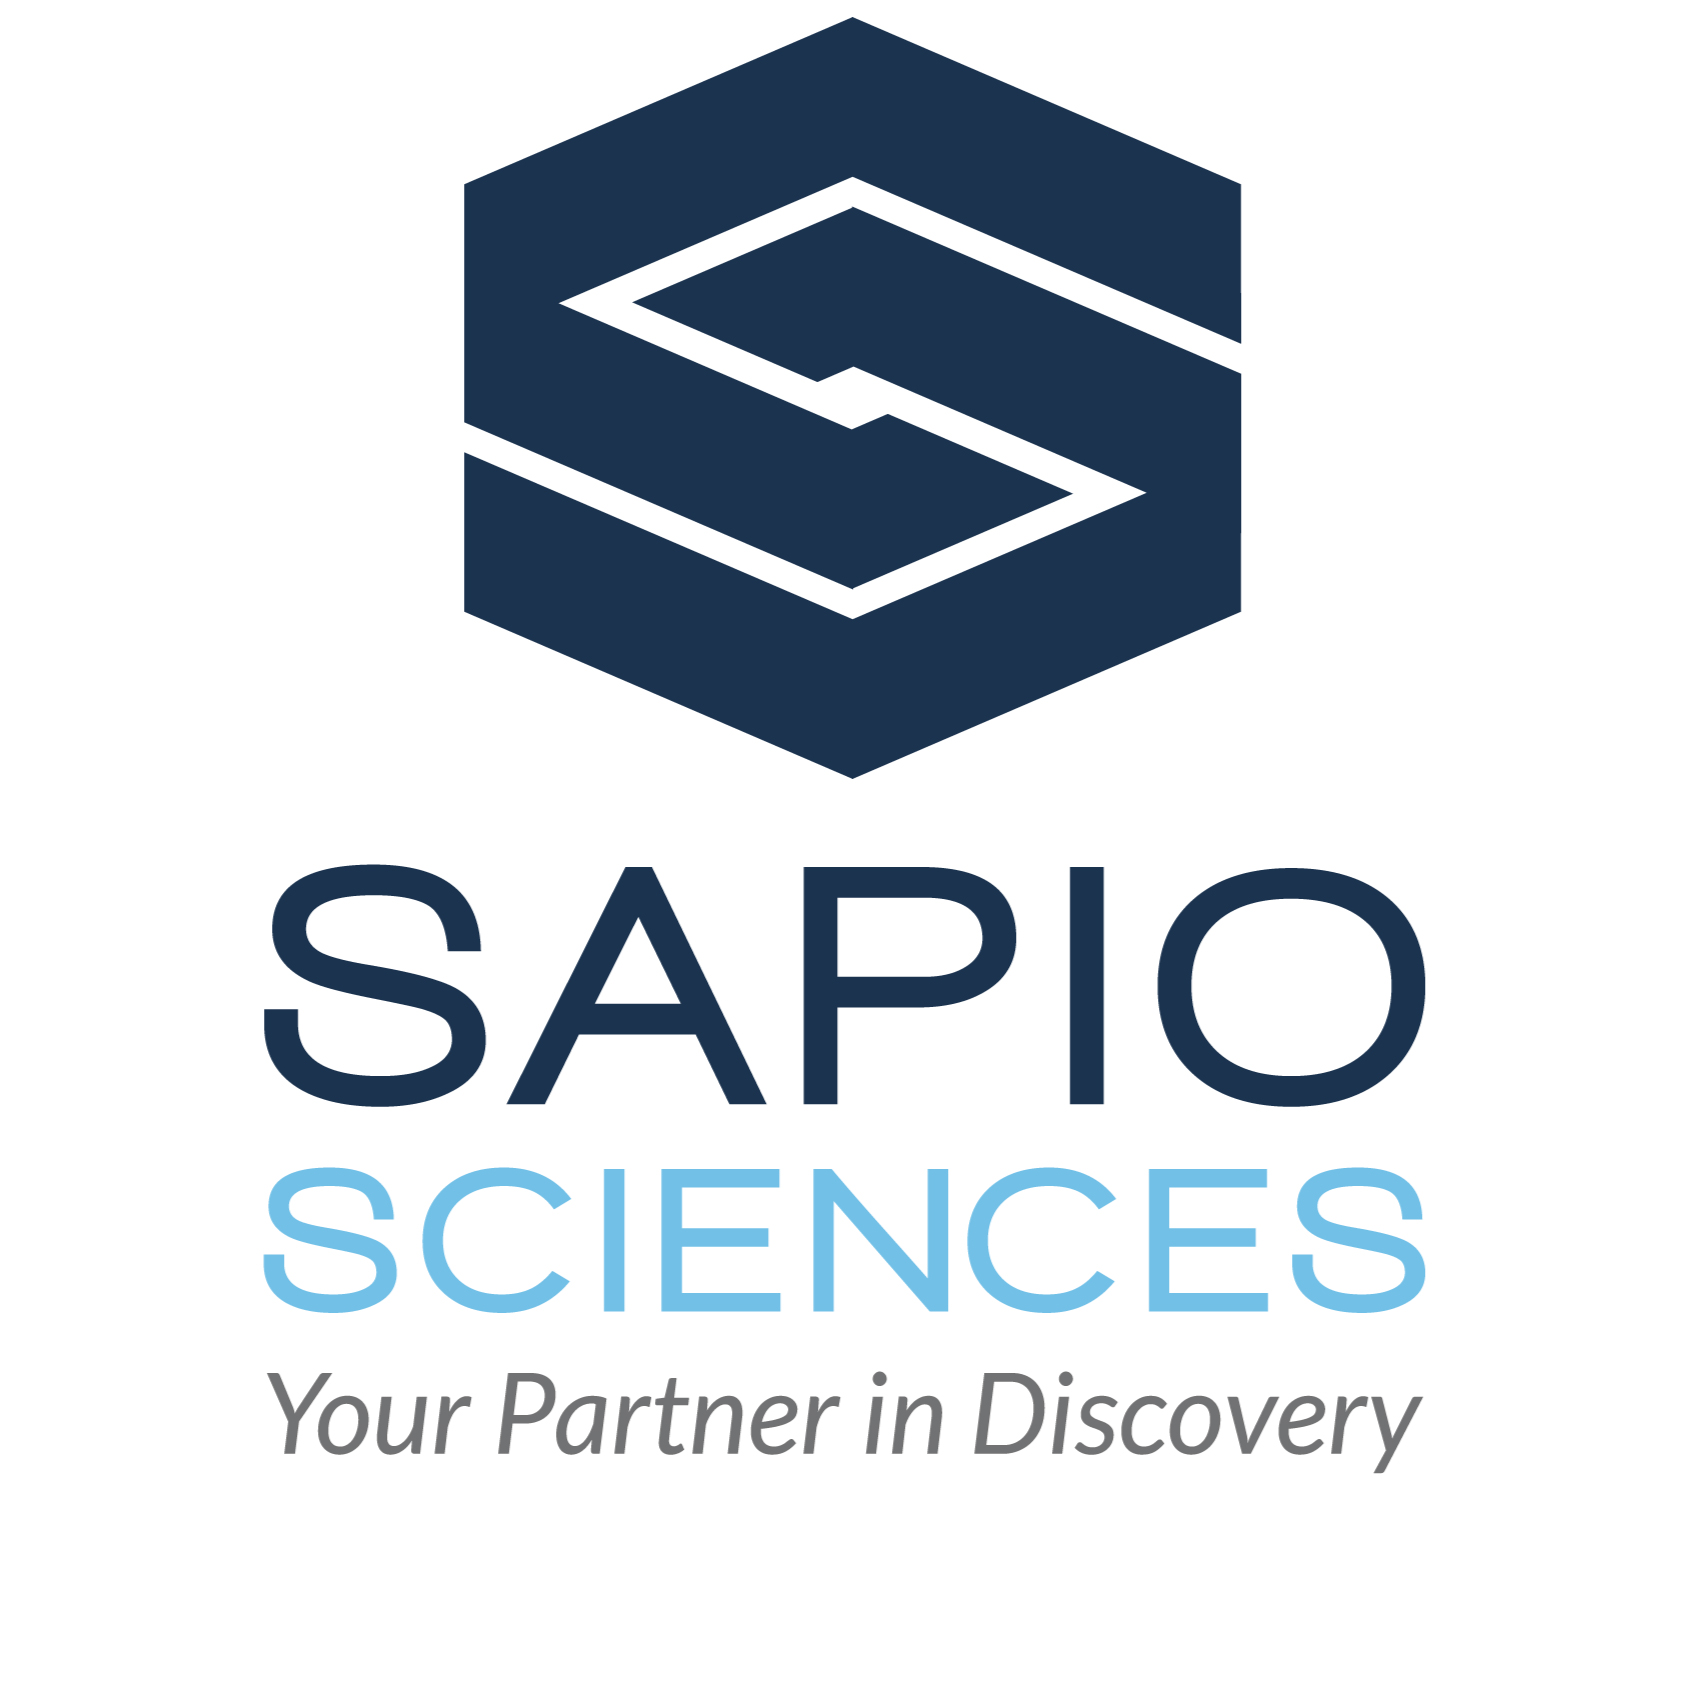 Sapio Sciences Rings in 2023 With Major Investment from GHO Capital